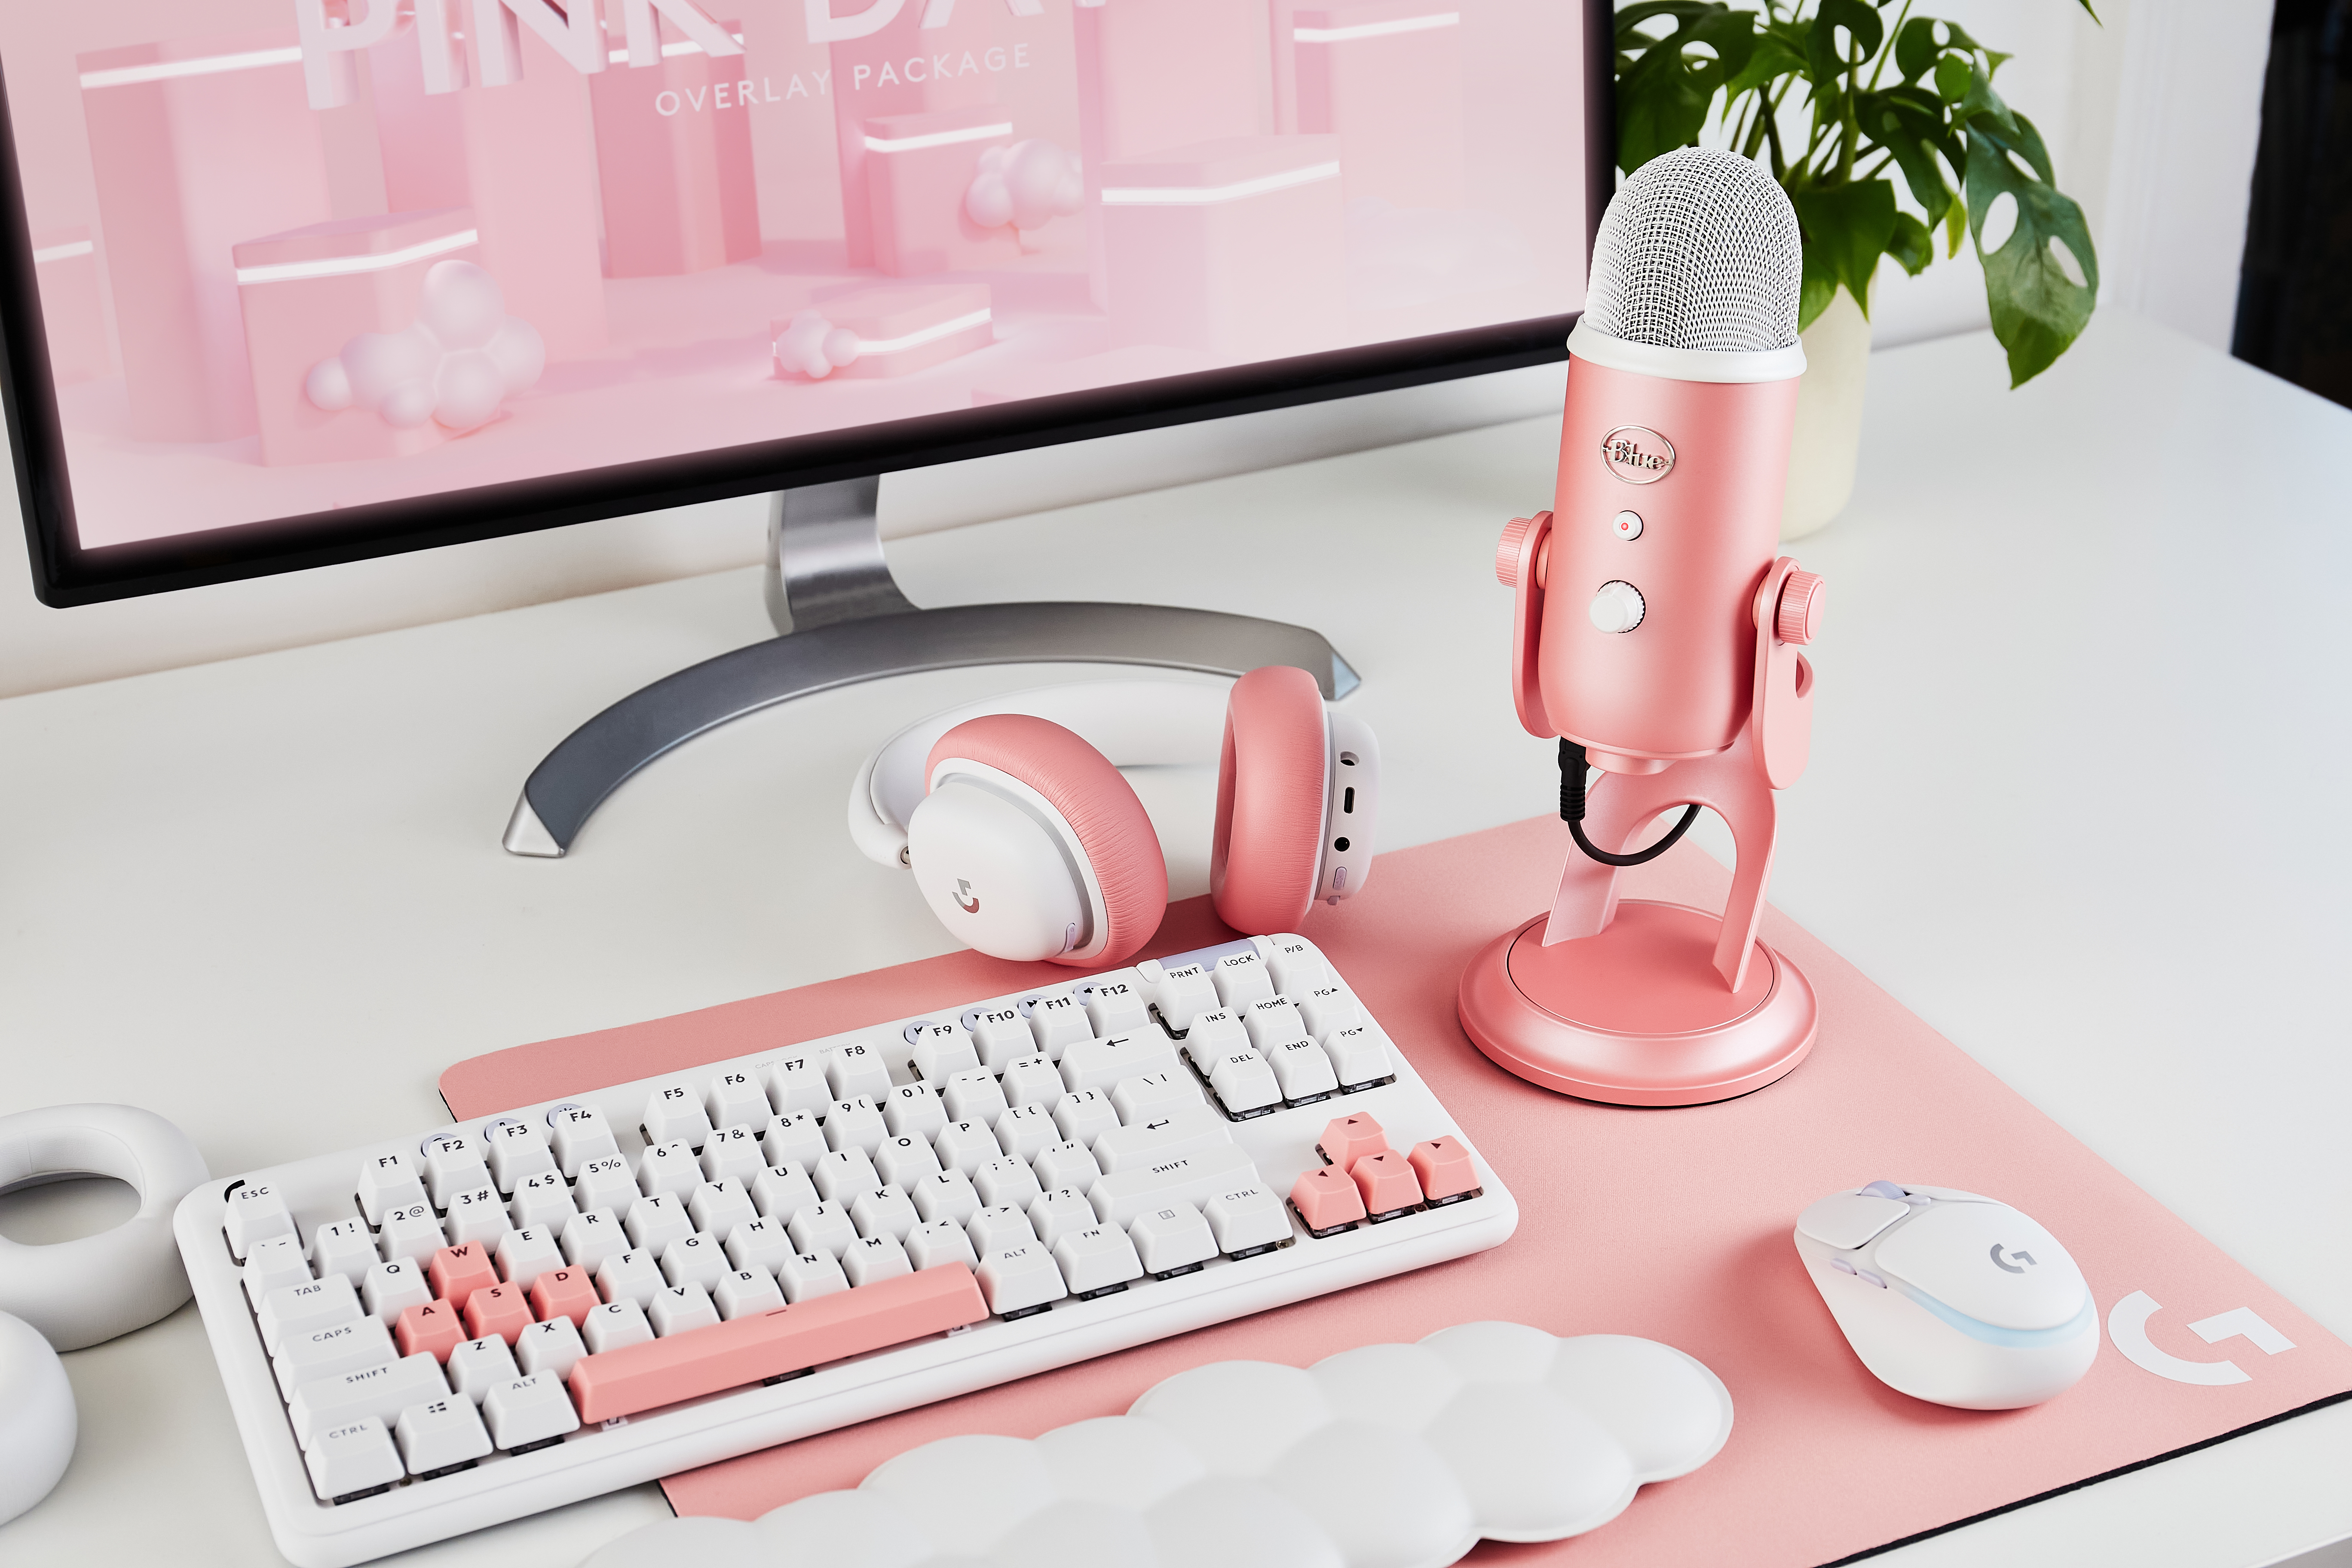 a pale pink gaming set up, complete with a cloud-shaped wrist pad